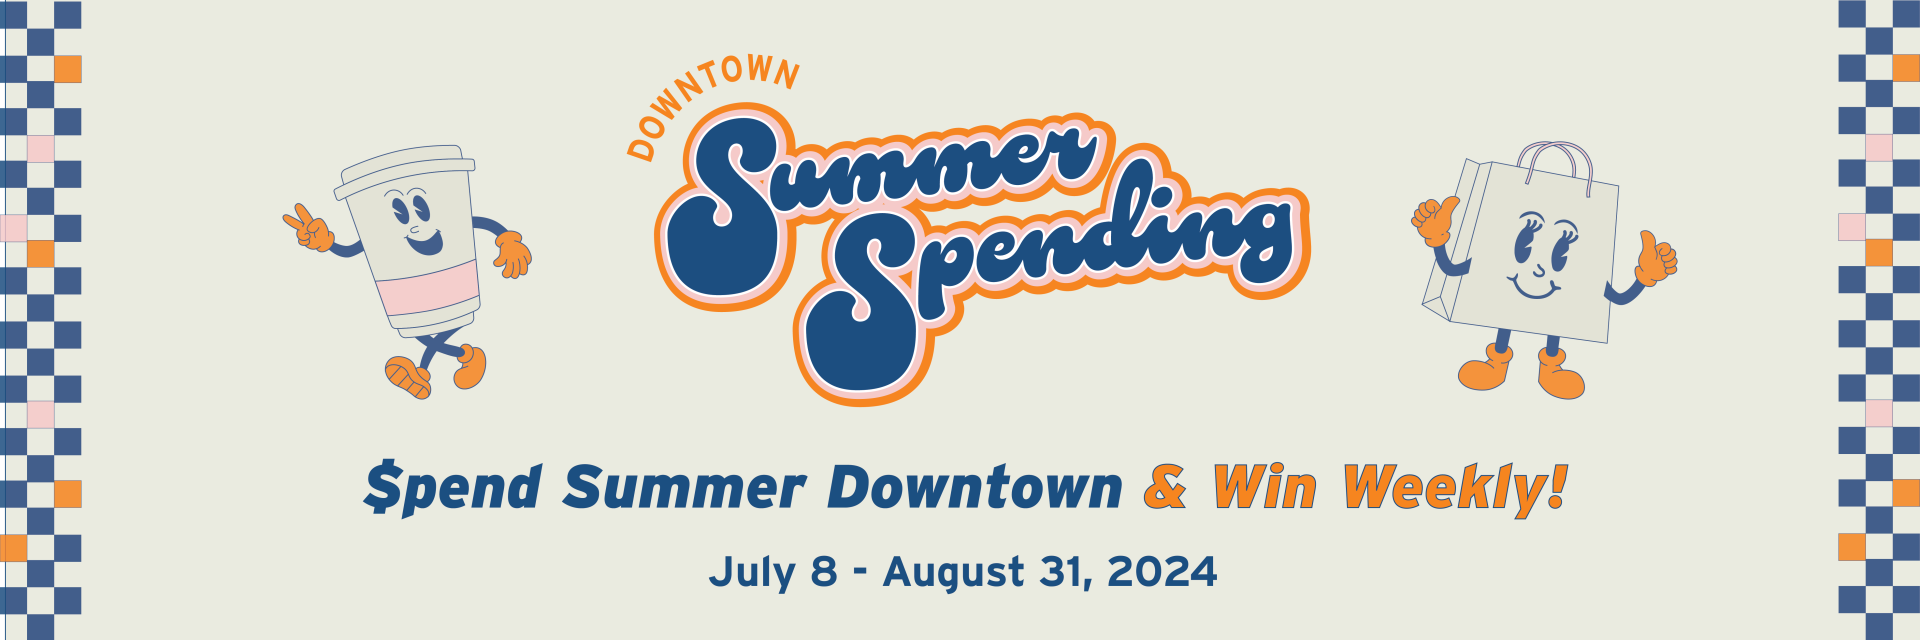 Cute, vintage illustrations with the words Downtown Summer Spending Program